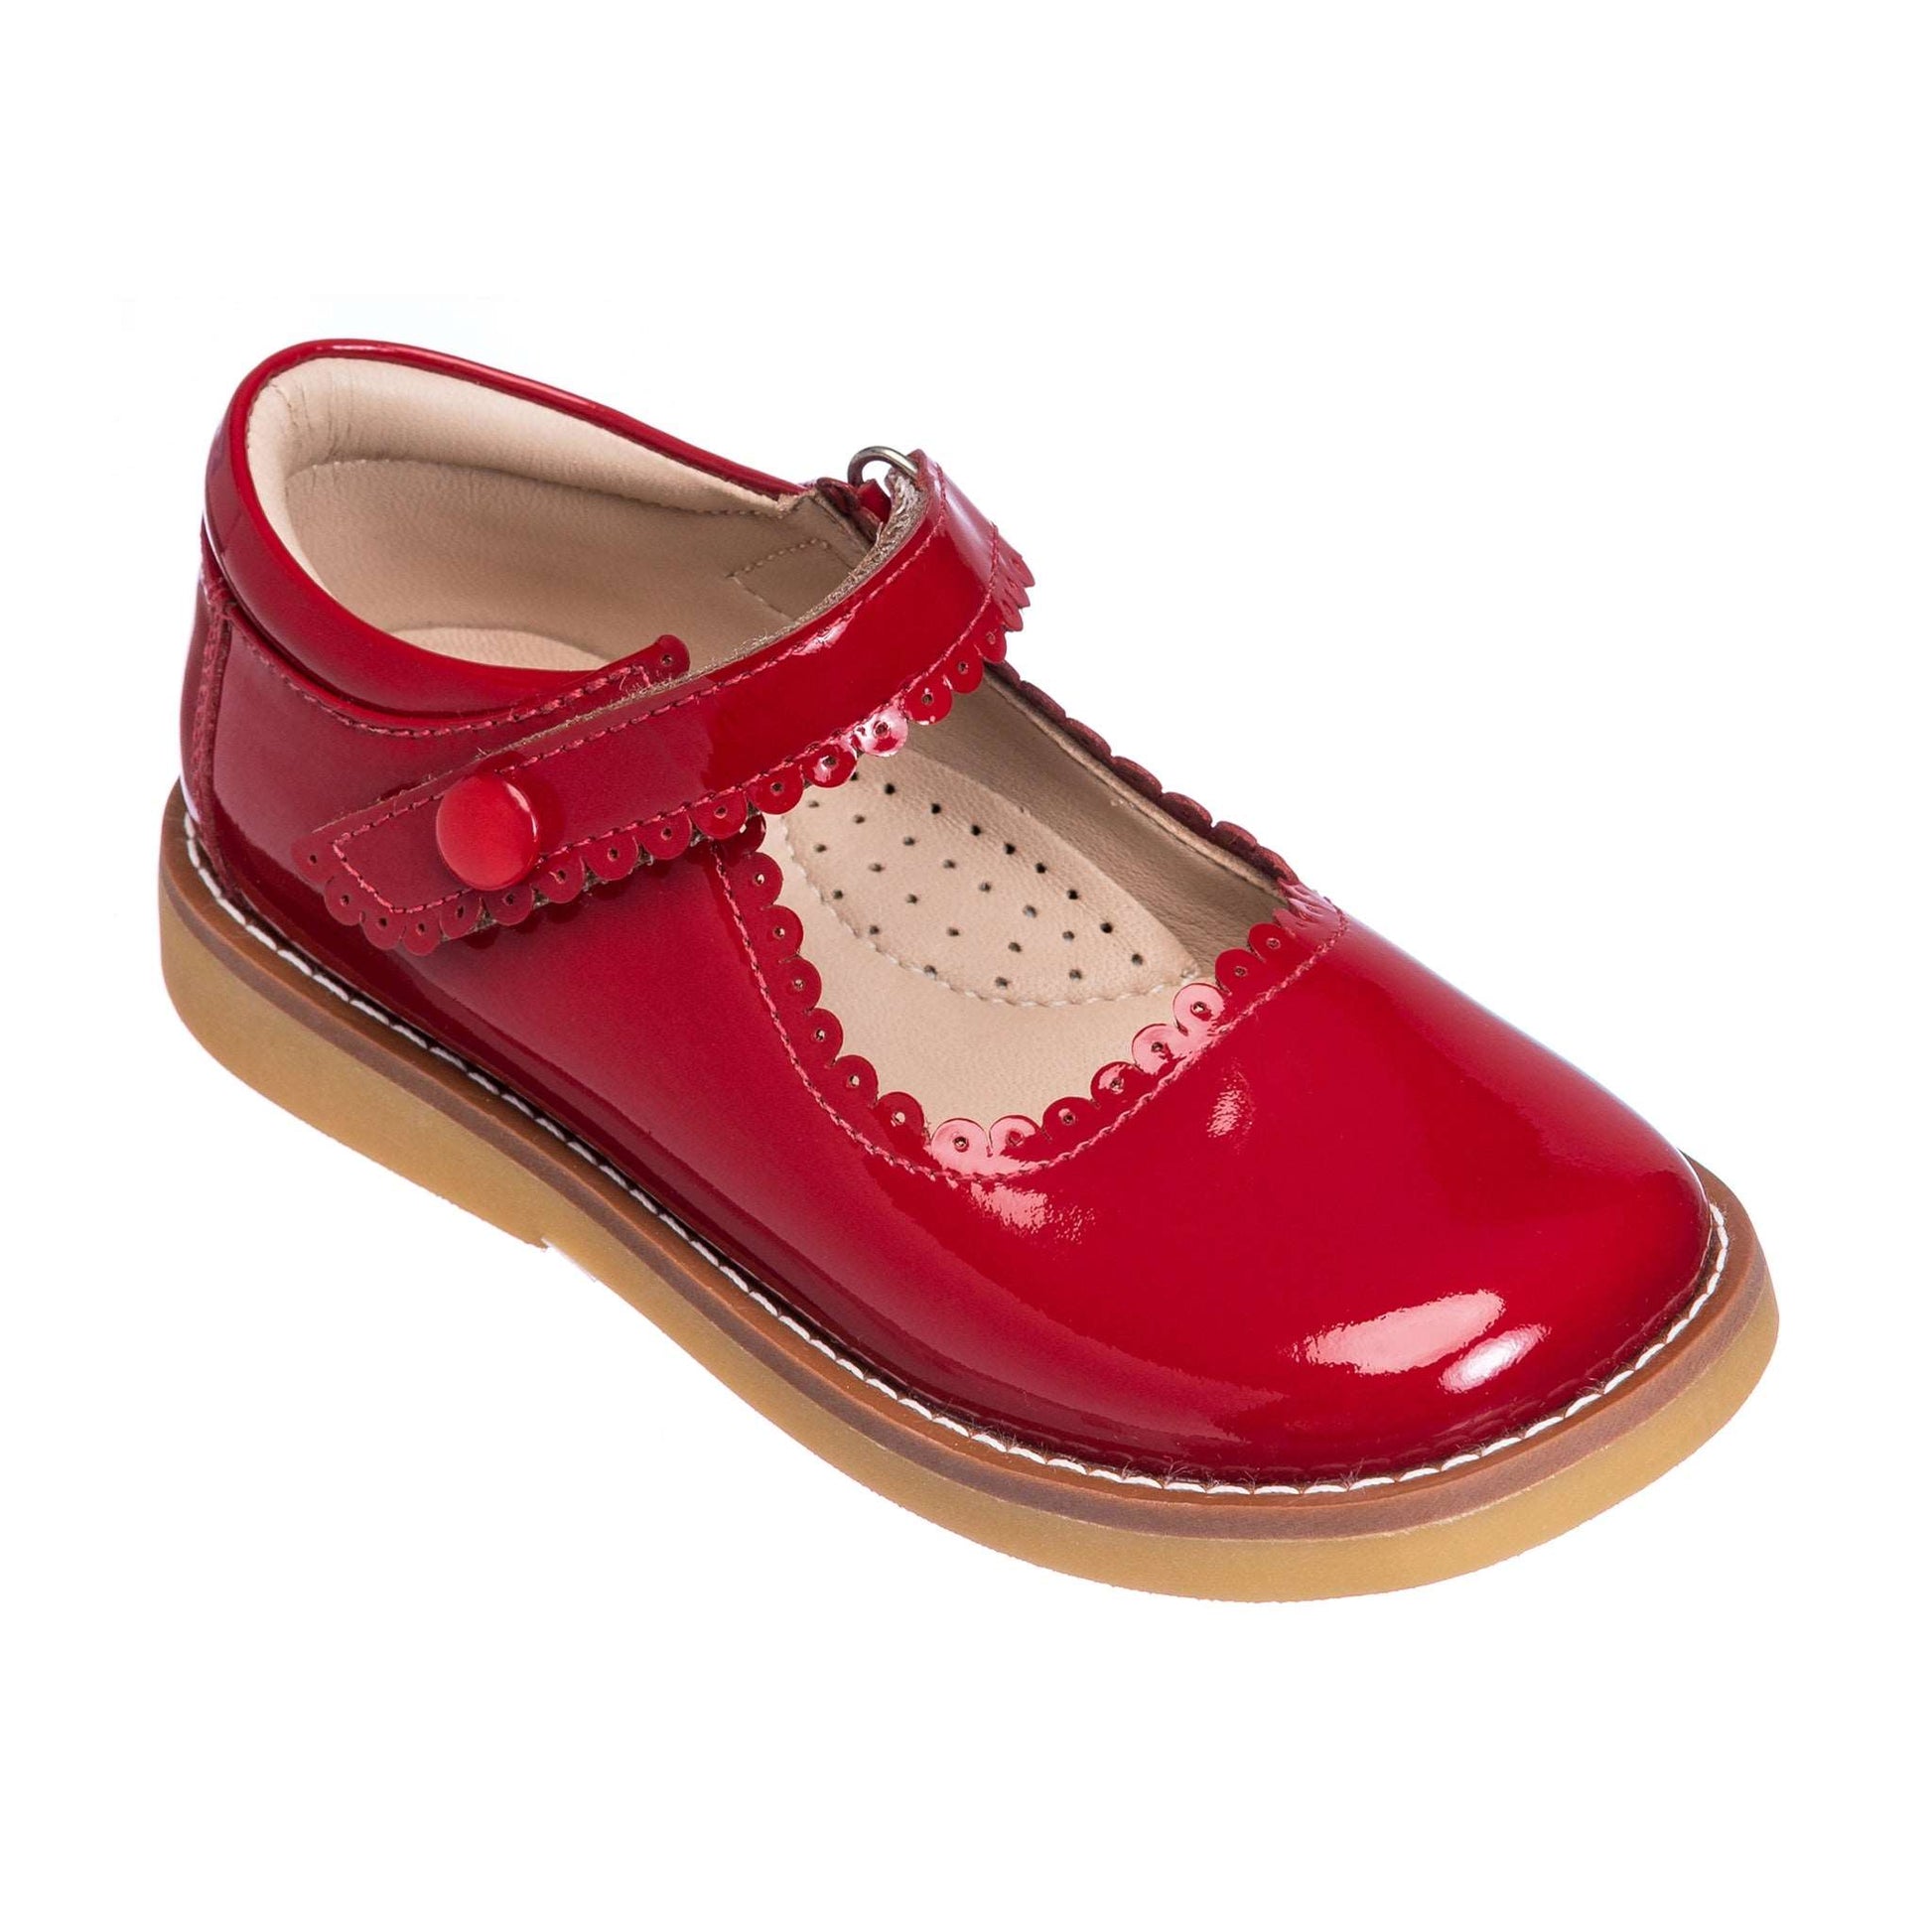 Mary Jane Patent Red